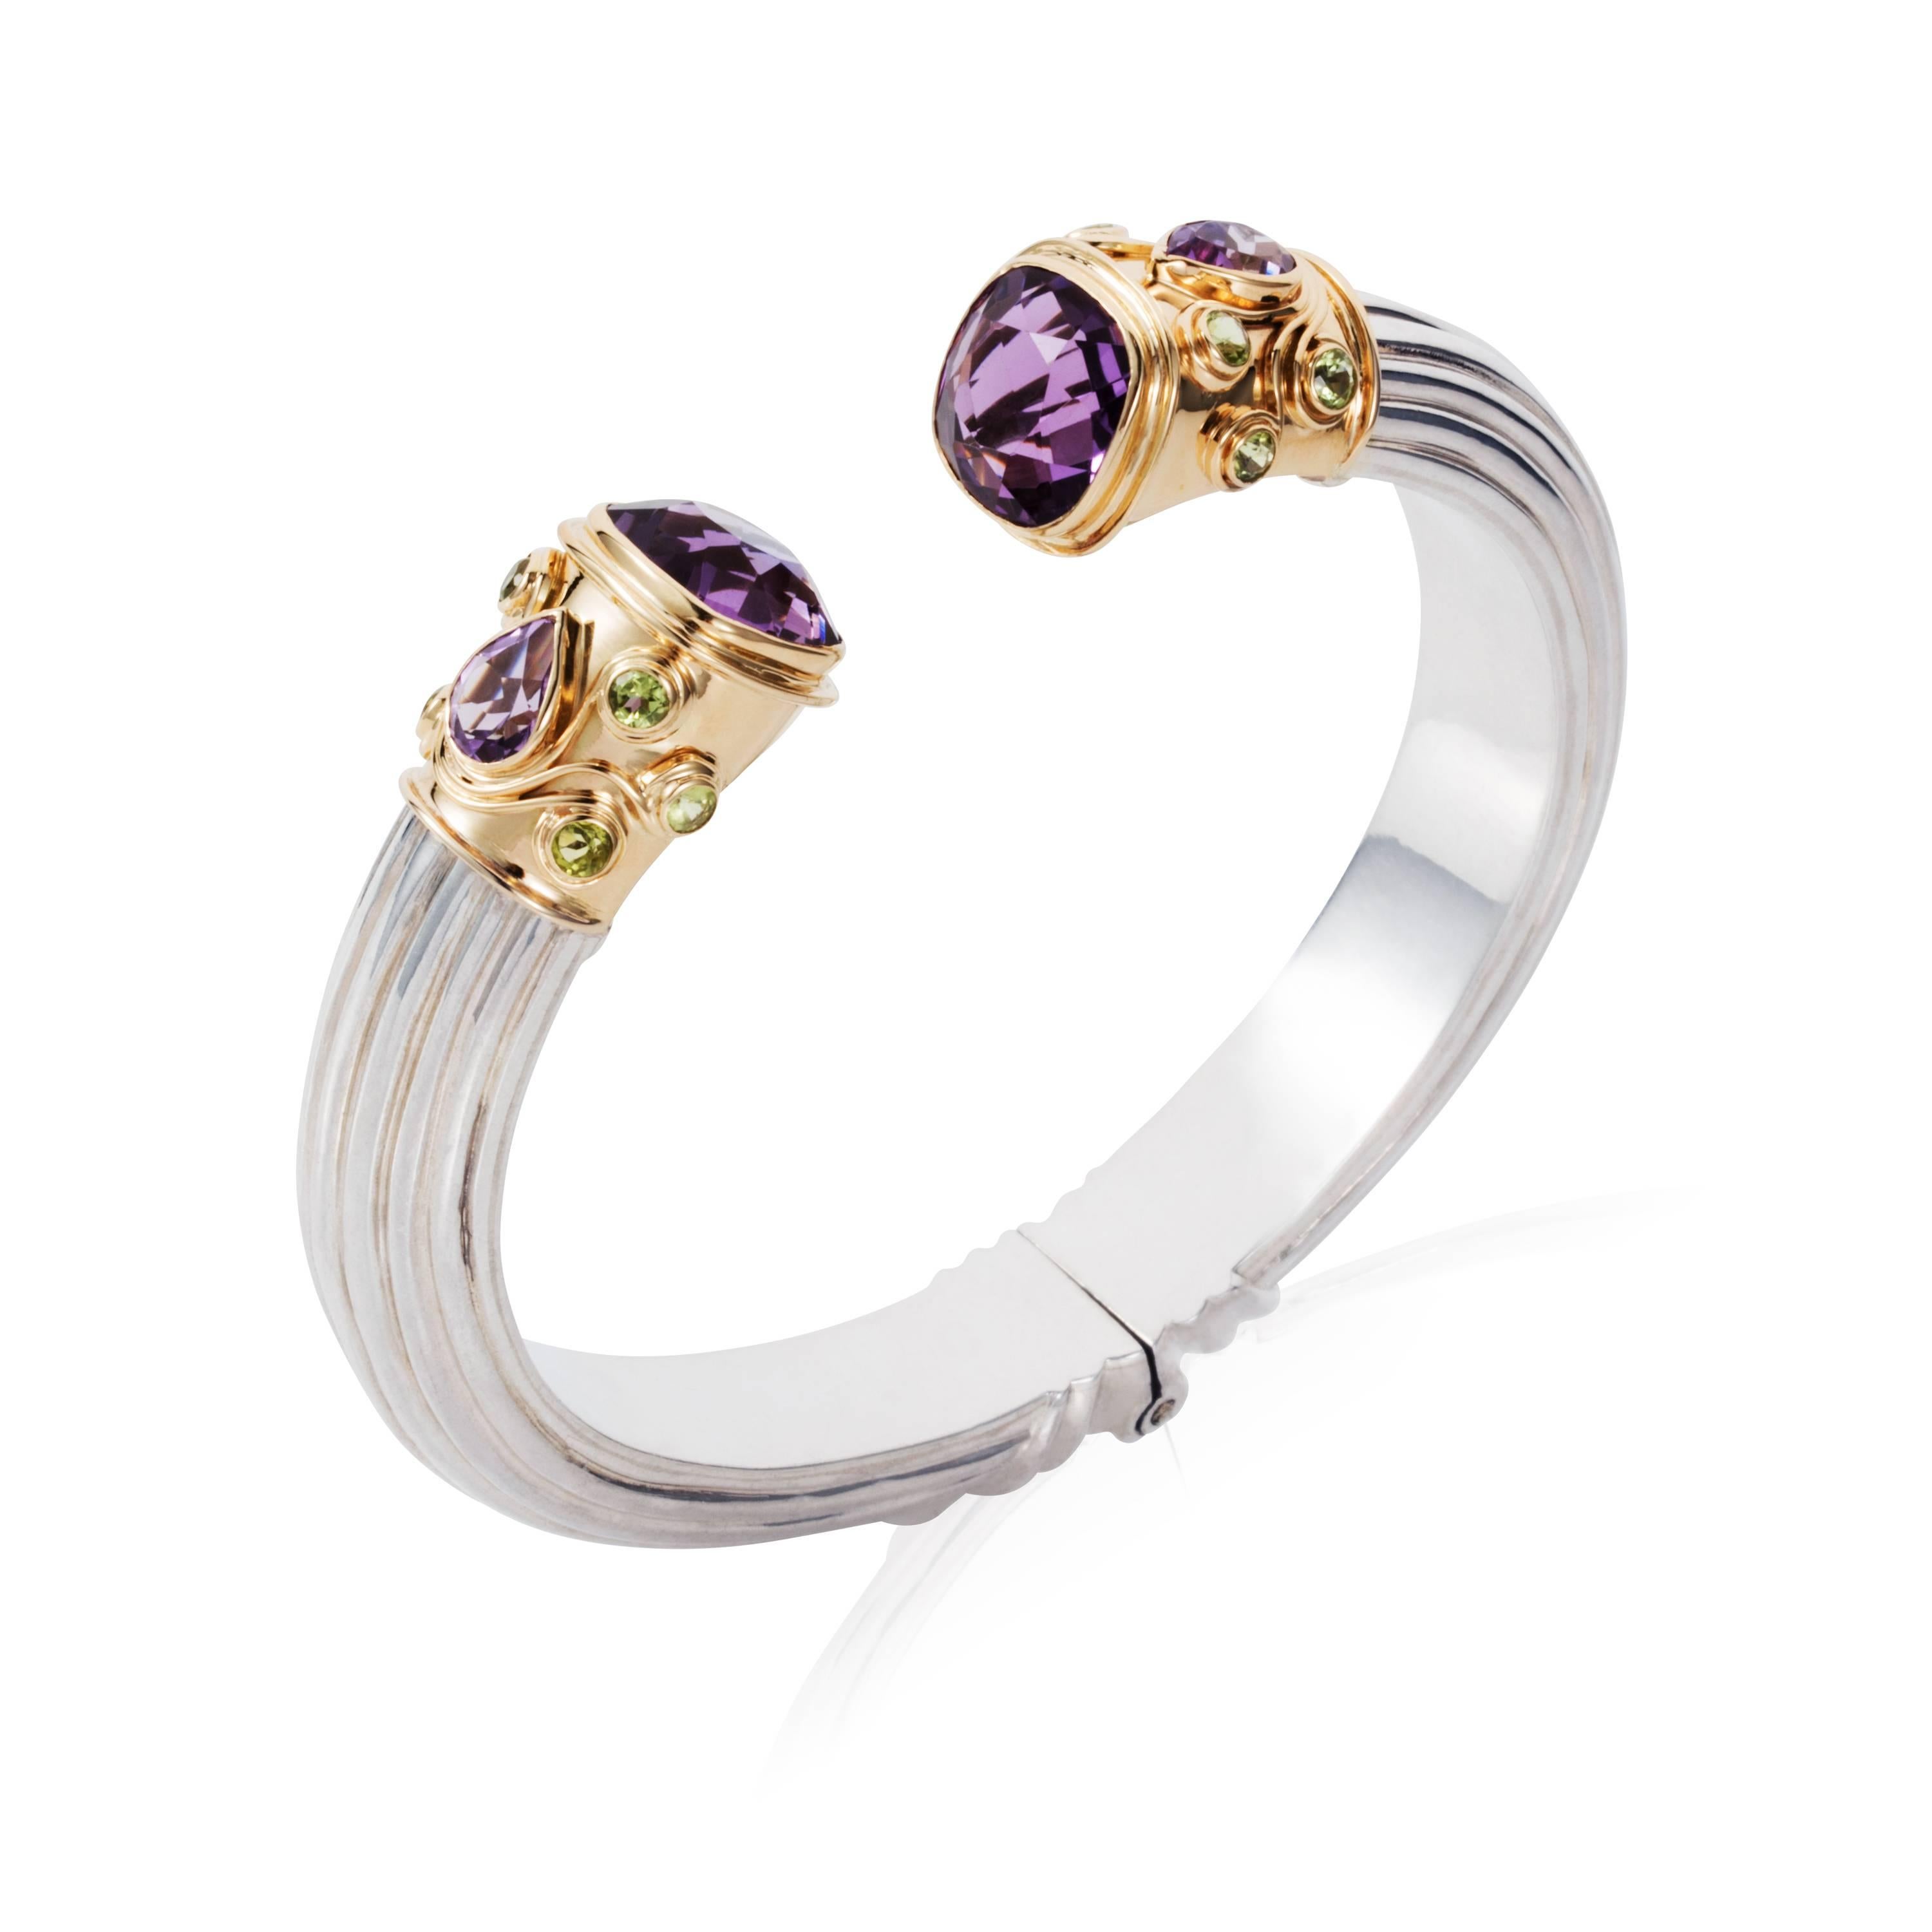 Amethyst Cuff bangle detail:
Gross weight: 61.550 grams 
Gold weight: 8.800 grams 
Total stone weight: 17.85 carats 

Citrine Cuff bangle detail:
Gross weight: 63.600 grams 
Gold weight: 6.800 grams 
Total stone weight: 17.74 carats 

Bangles can be